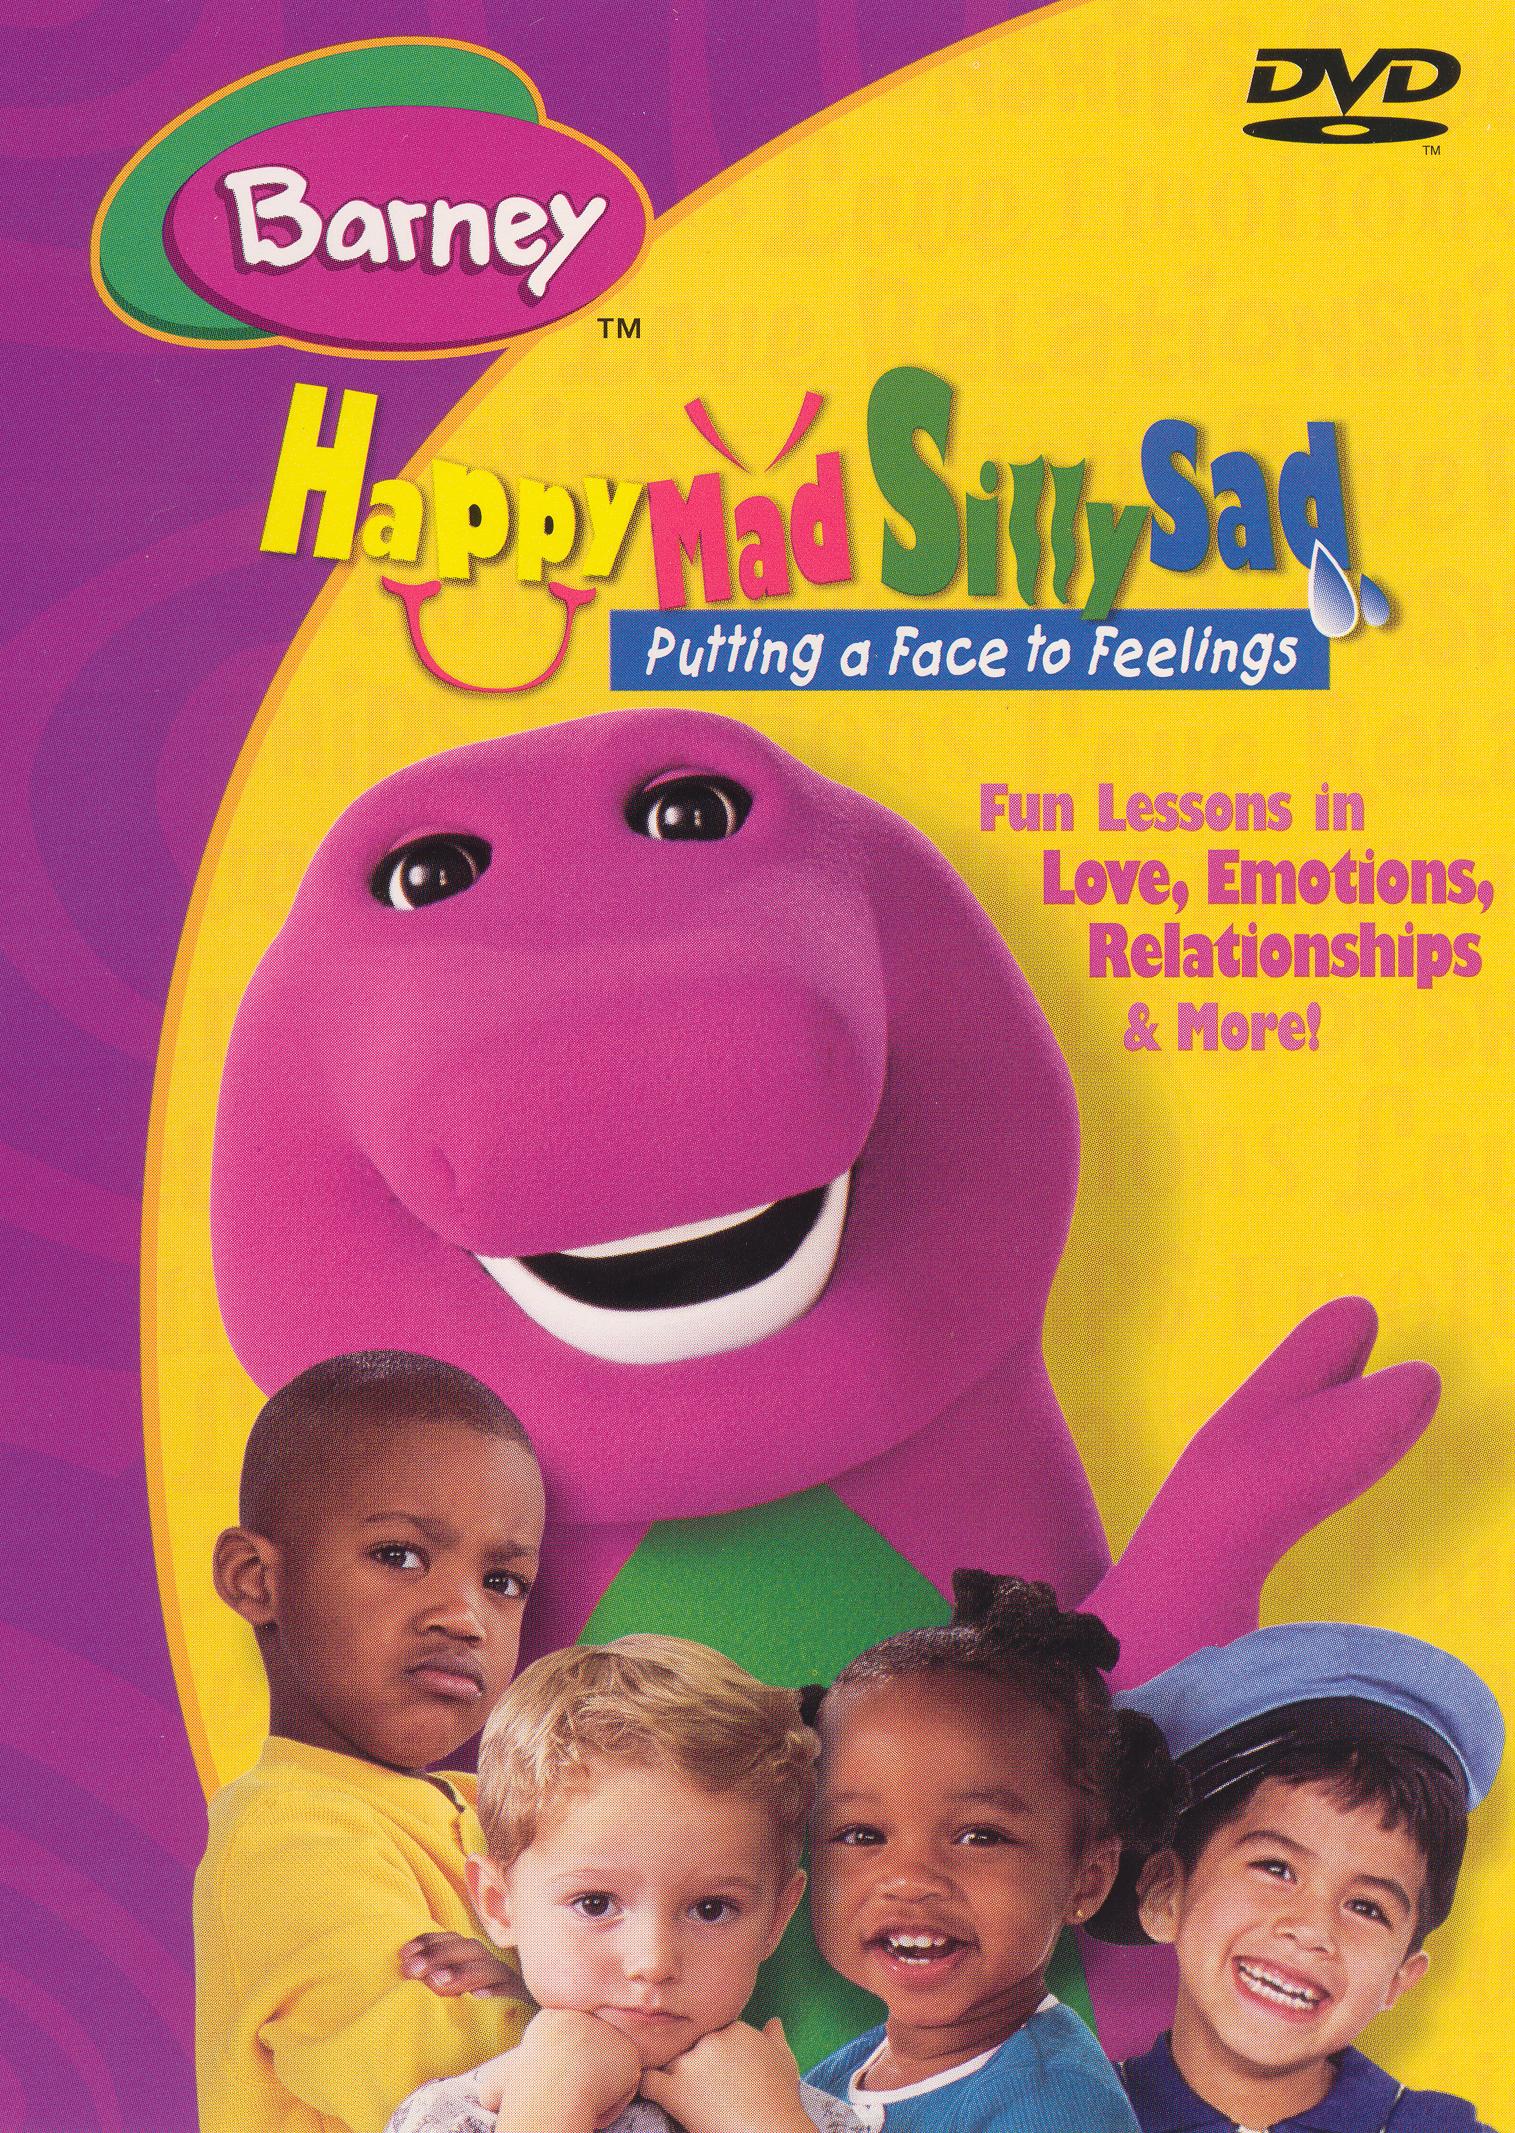 Best Buy Barney Happy Mad Silly Sad Putting A Face To Feelings Dvd